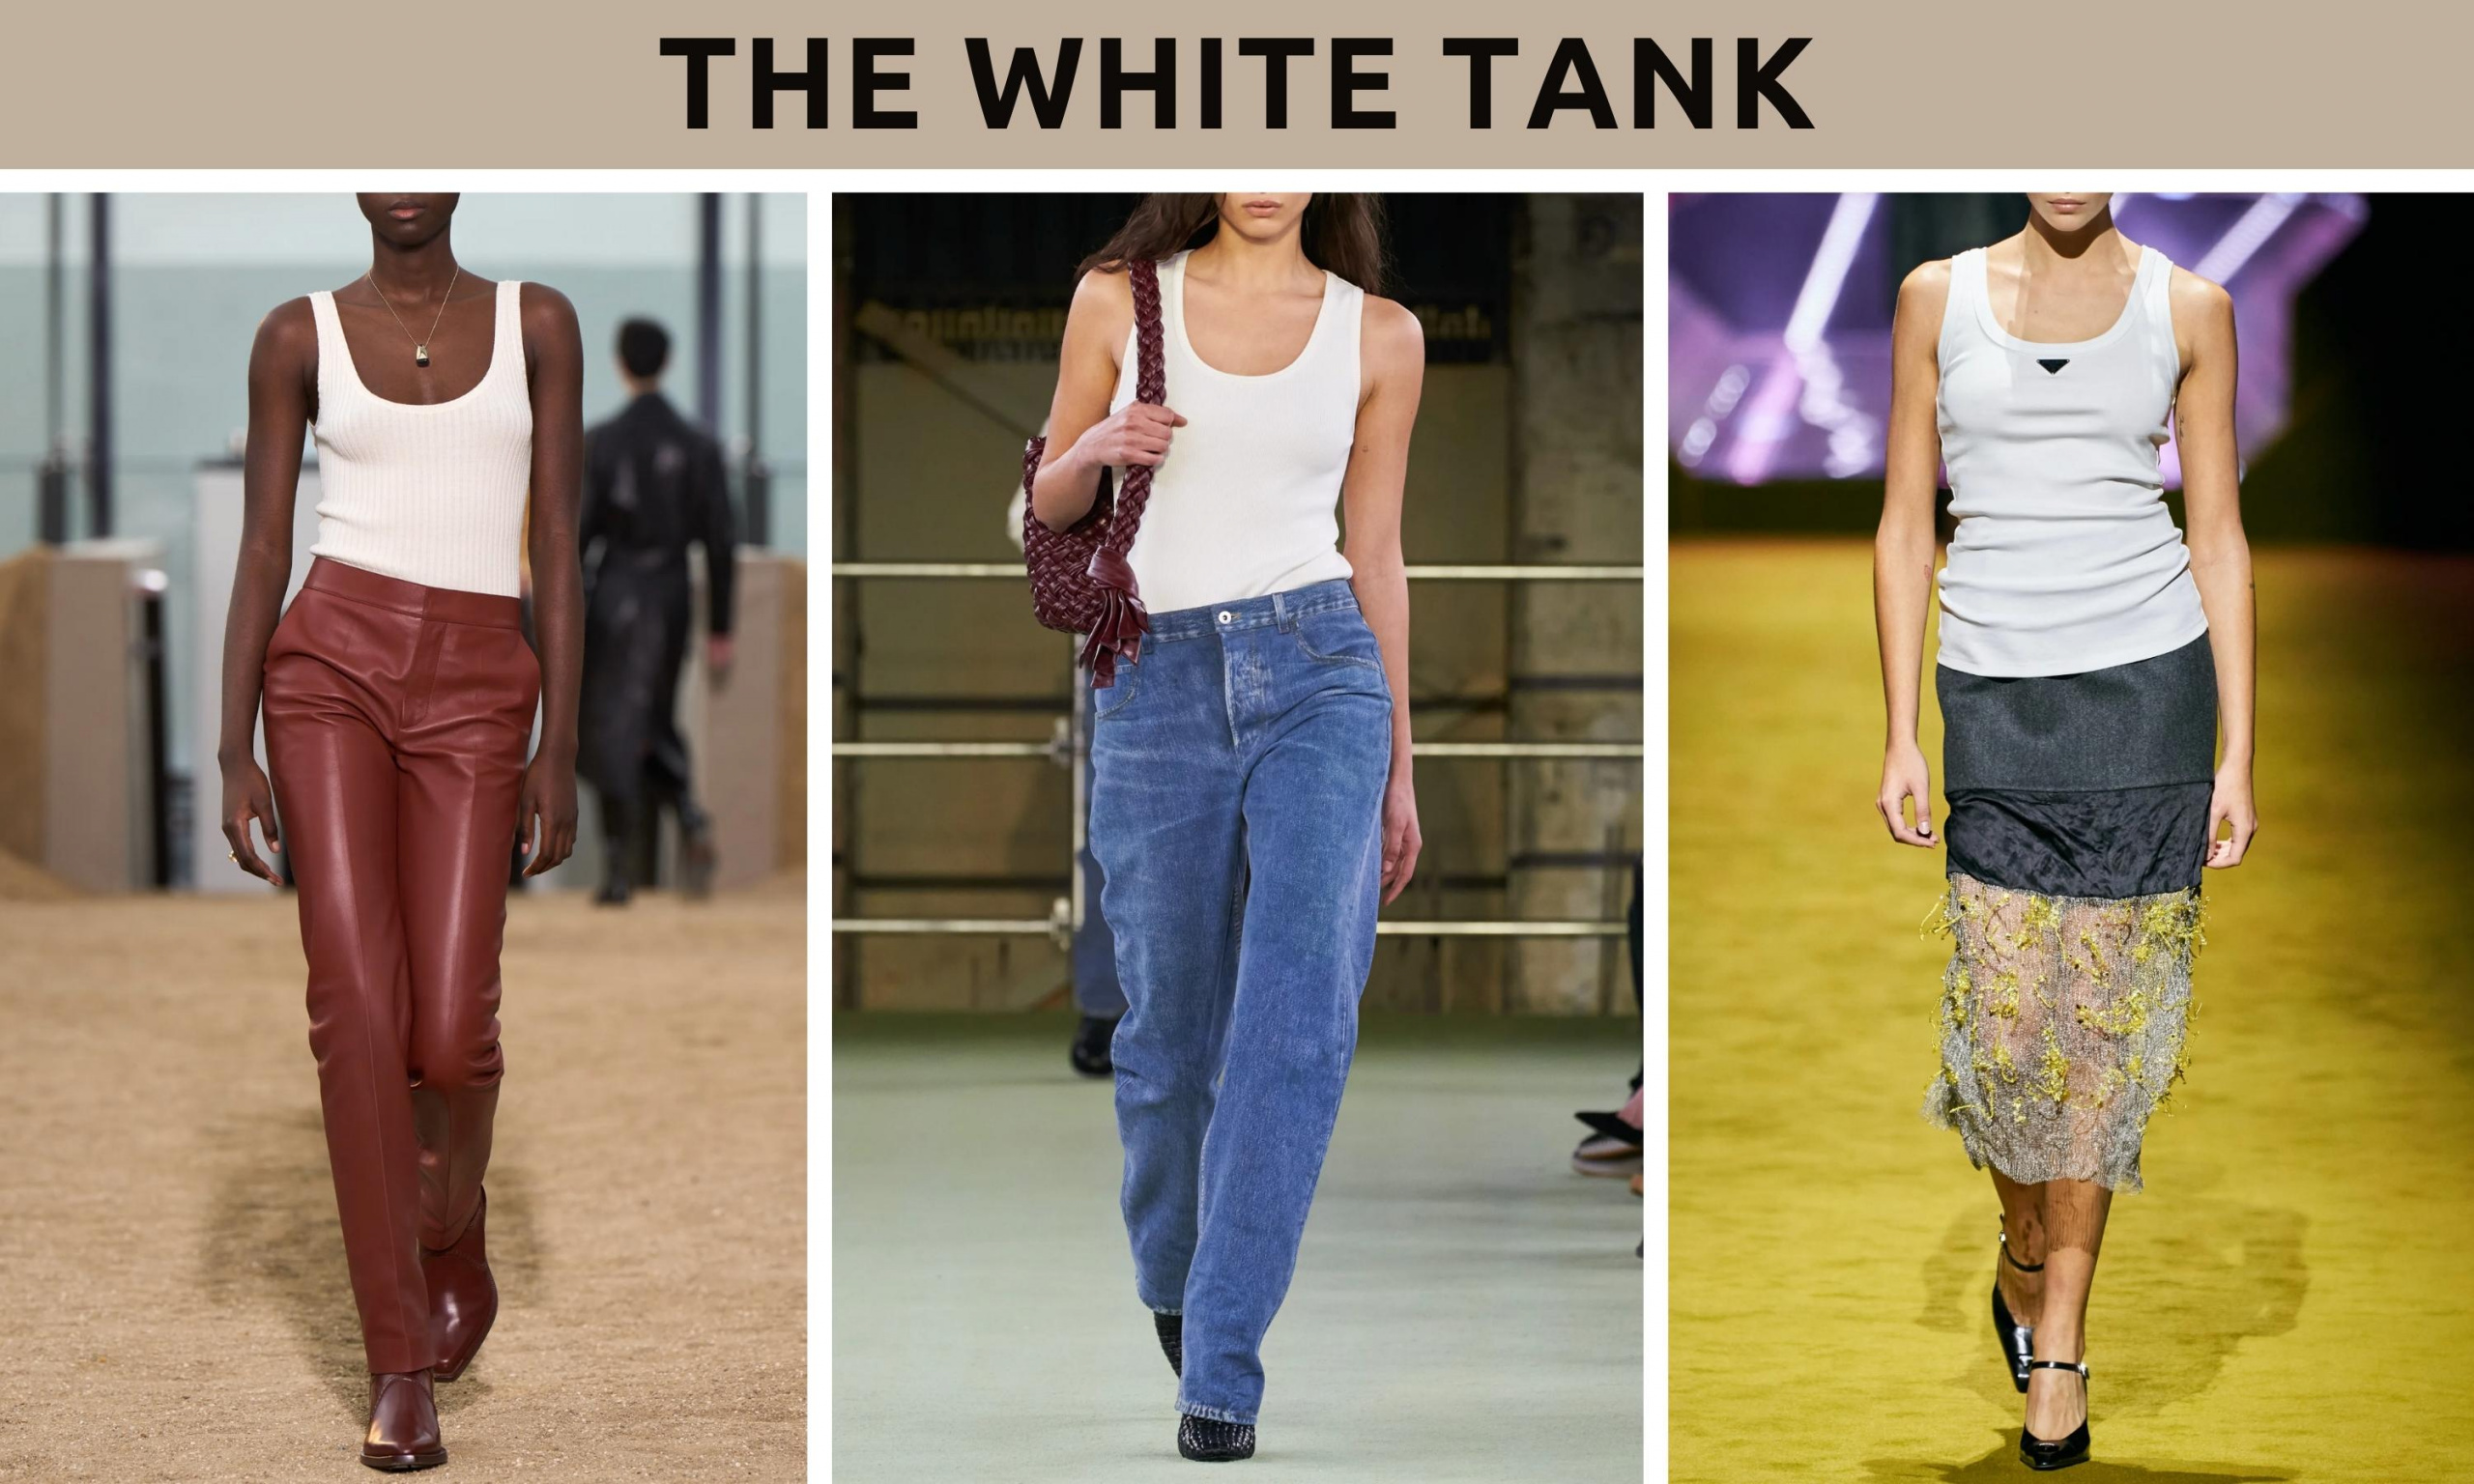 wearable fall trends, fall fashion trends, fall trends, wearable trends, how to wear trends, trends over 40, wearing trends over 40, 2022 fall fashion trends, 2022 wearable fall trends, white tank, white tank trend